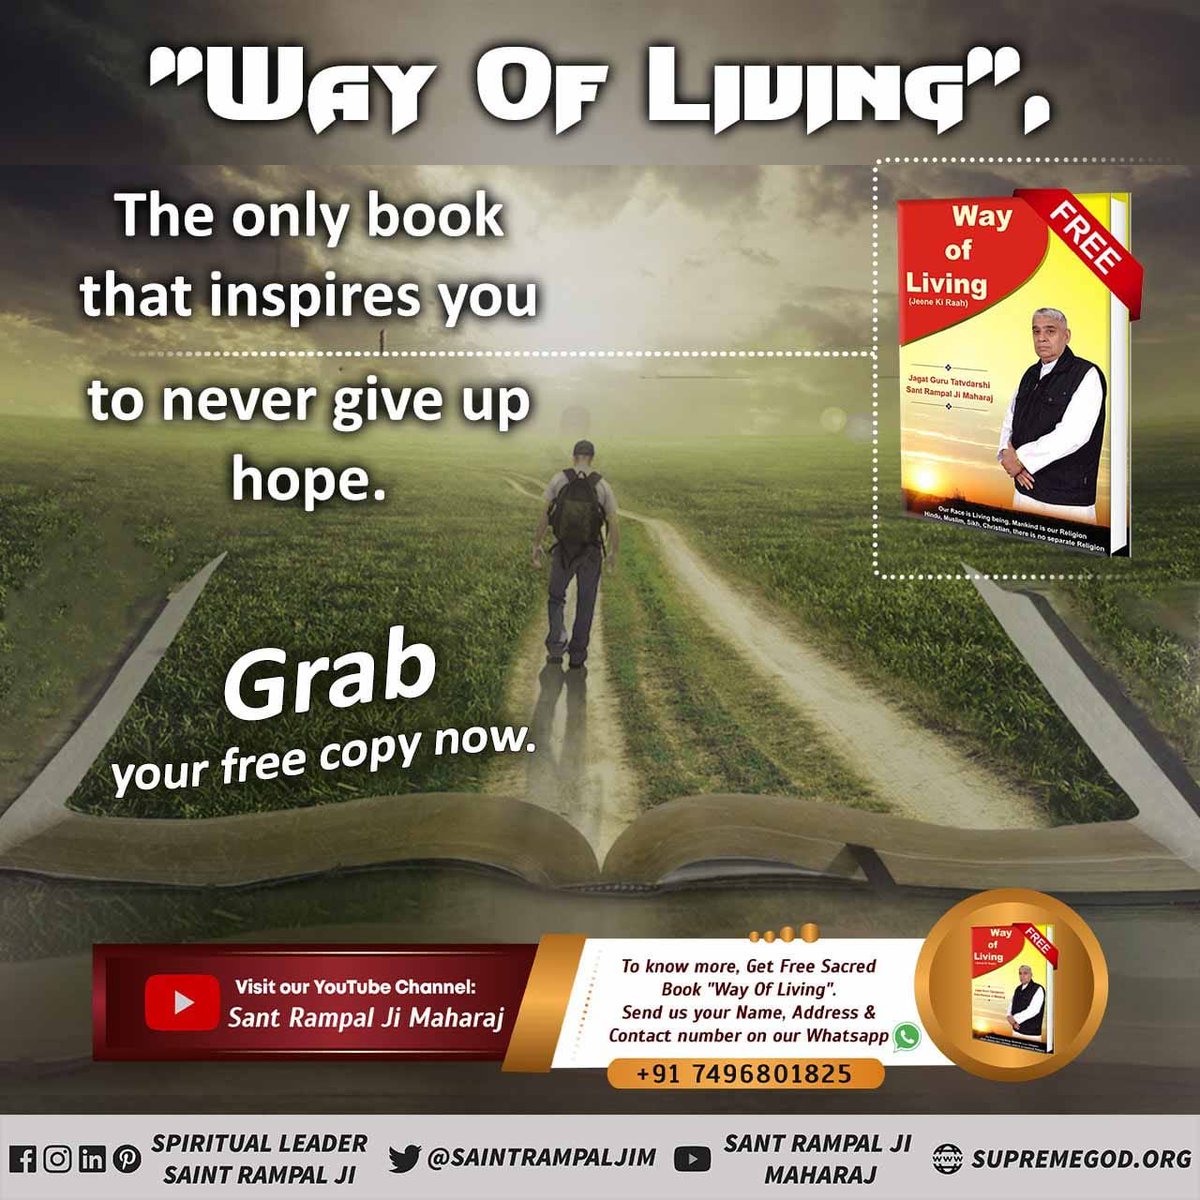 #GodMorningMonday 
Must read this book WAY OF LIVING that inspires you to never give up hope
Order now🙏
#SpiritualGrowth